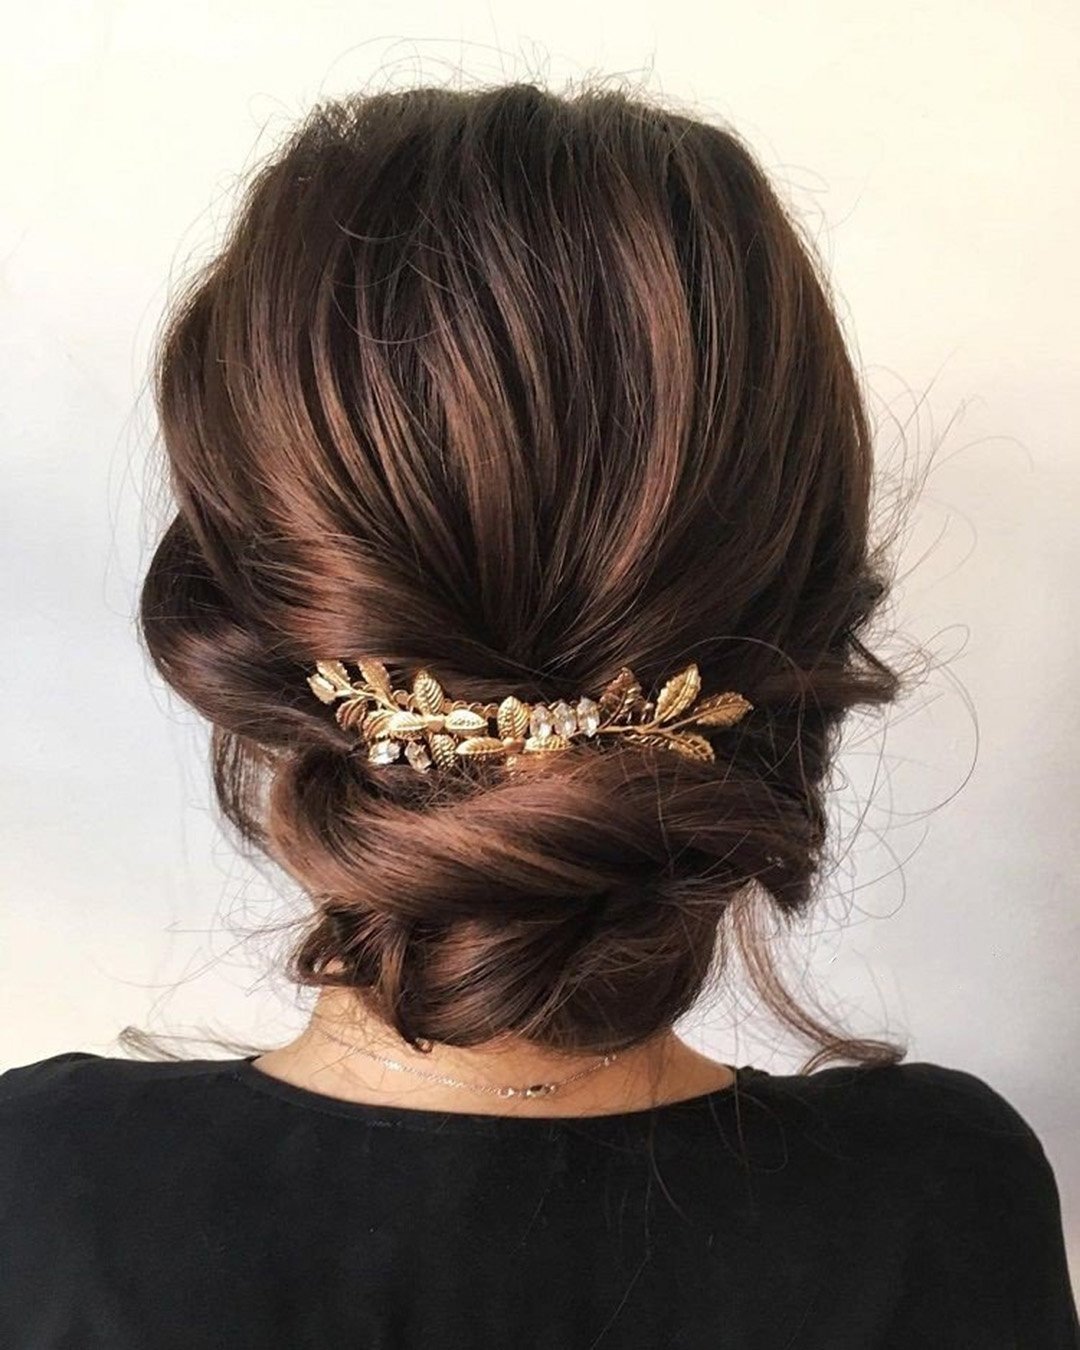 classic wedding hairstyles low updo with gold haircomb sabrinadijkman